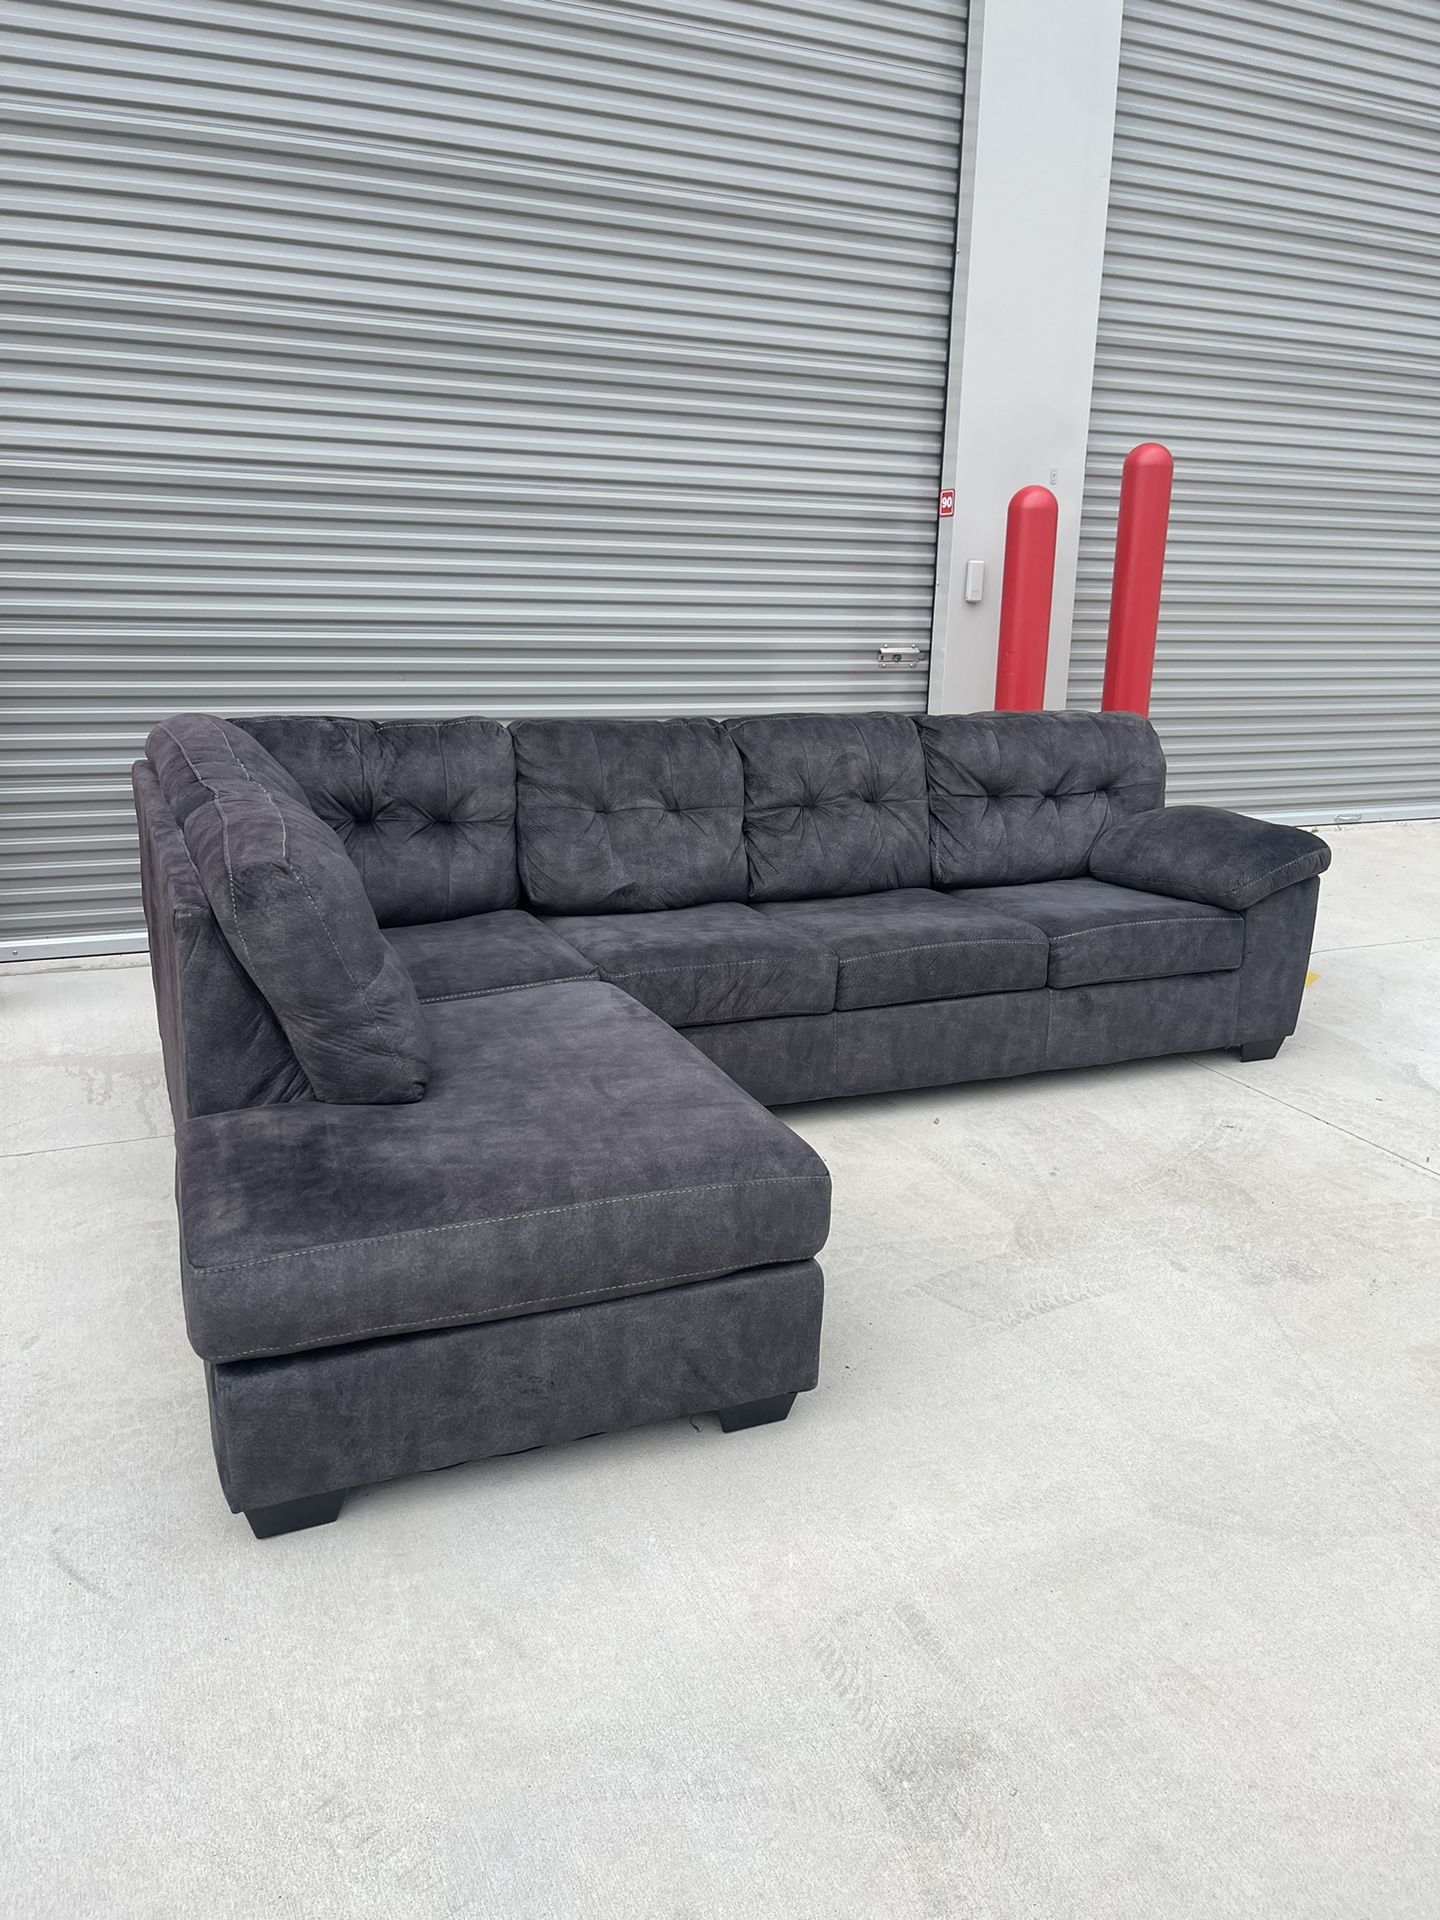 Dark Sectional Couch